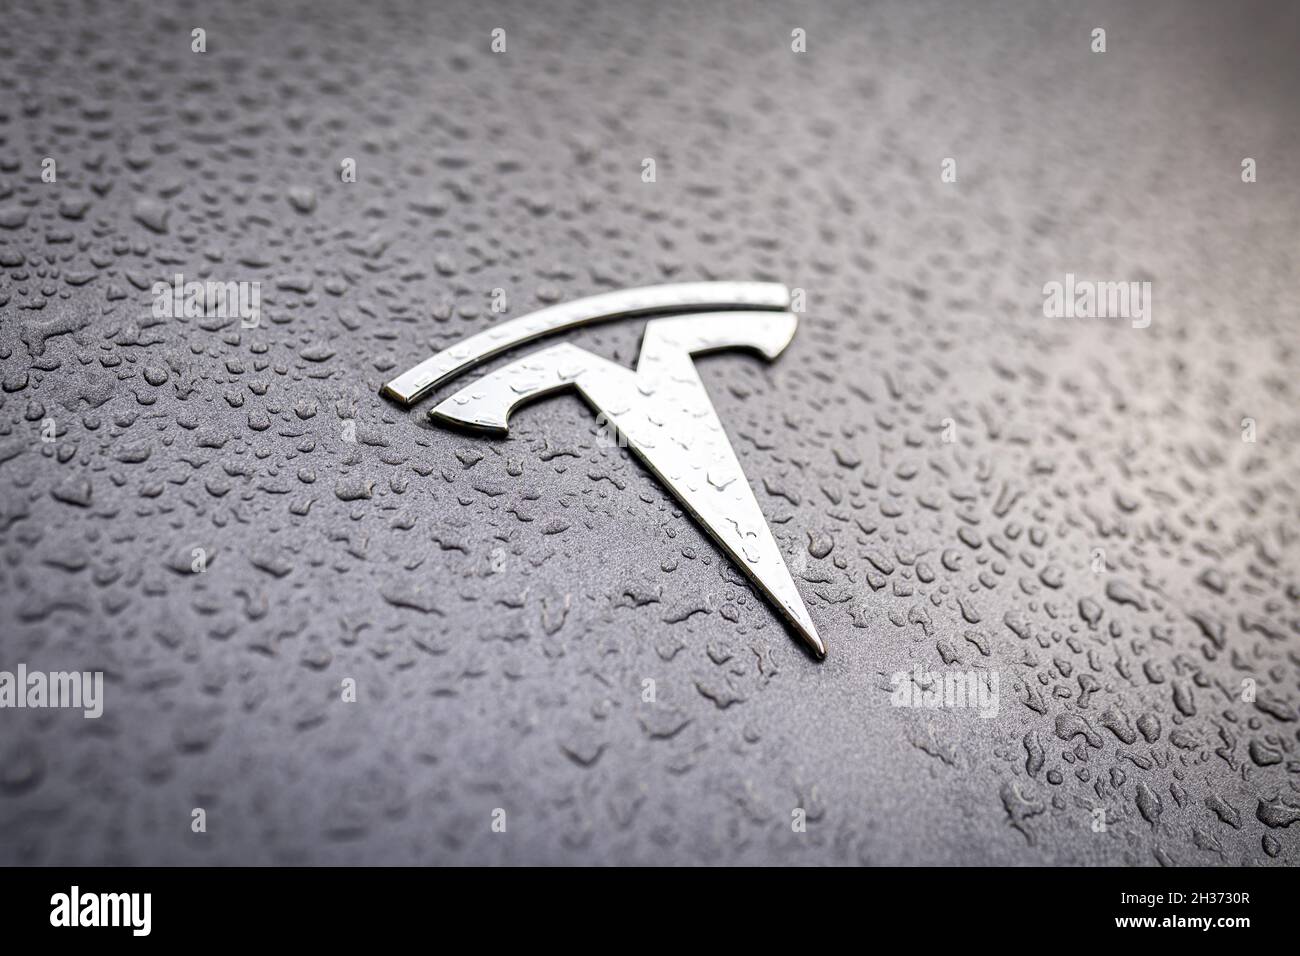 Tesla brand logo on a grey car with raindrops close-up. Silver badge with water droplets. Tesla Motors is an American company that manufactures modern electric cars. Warsaw, Poland - October 23, 2021 Stock Photo